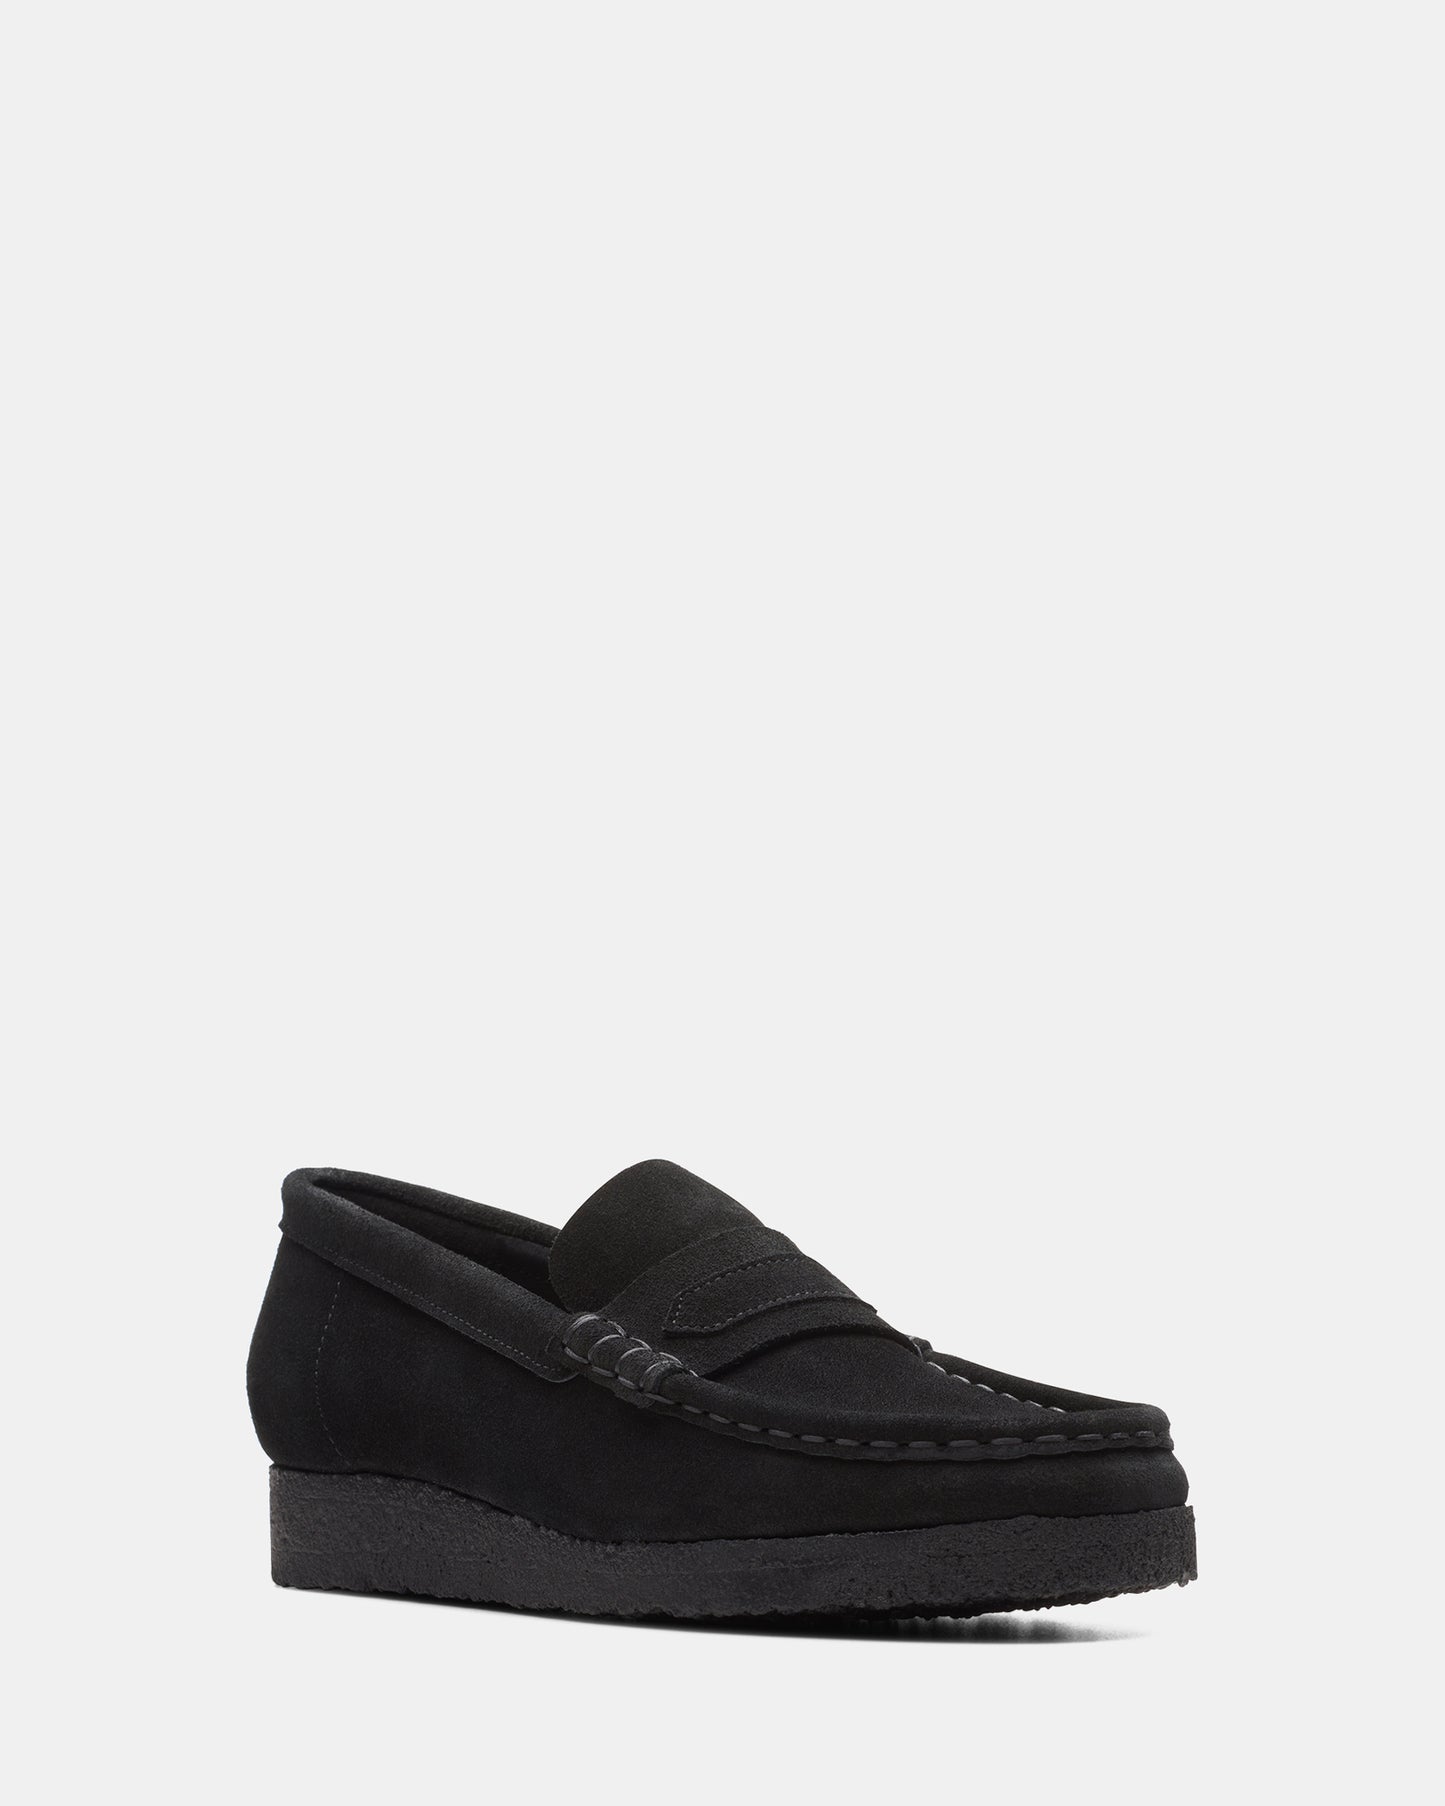 Wallabee Loafer Black Suede